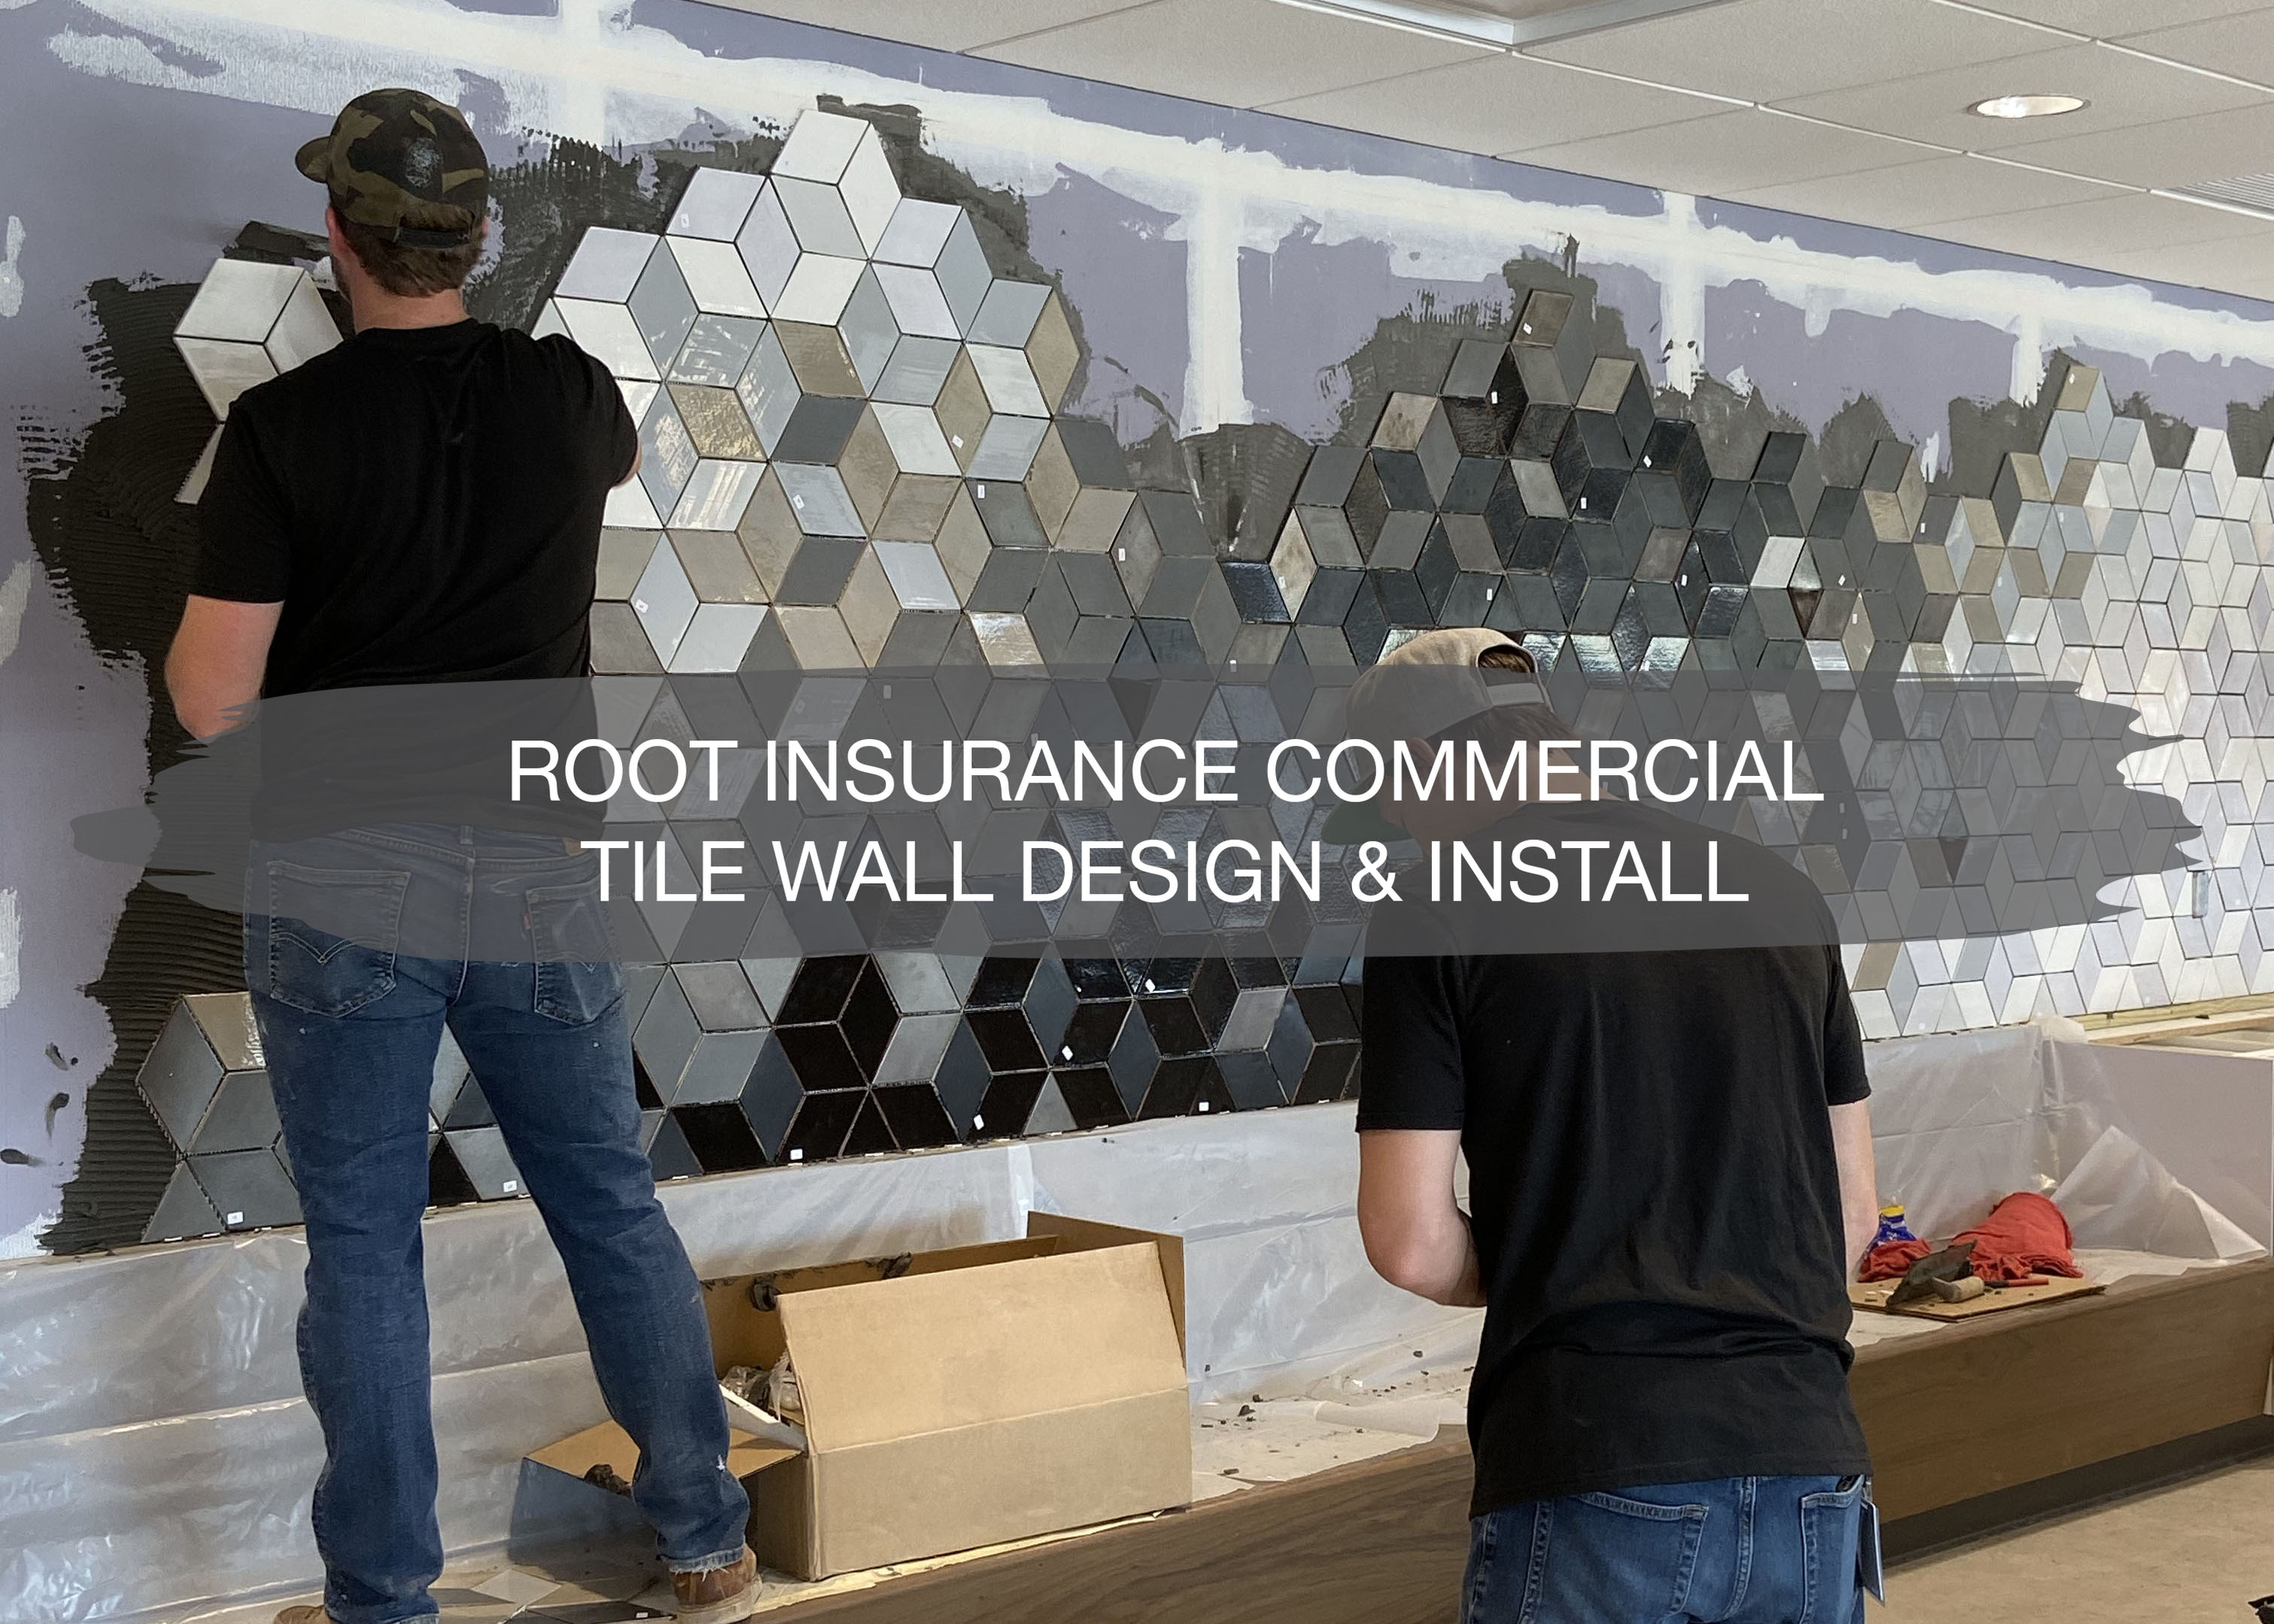 Root Insurance Commercial Tile Wall Design & Install 1